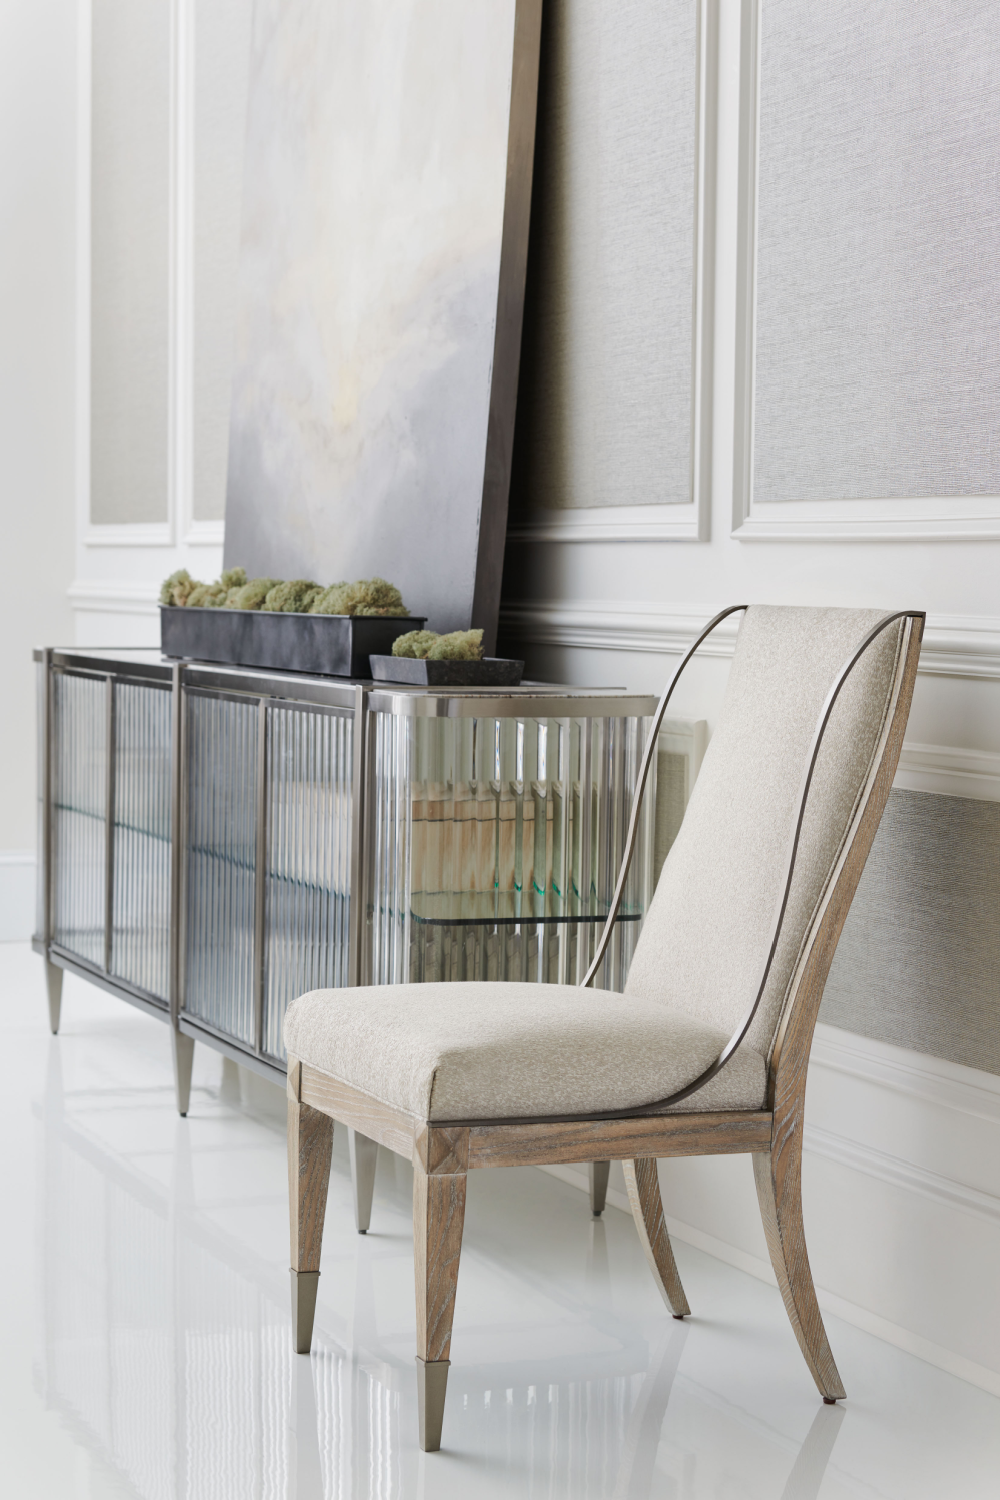 Ash Wood Side Chair | Caracole Open Arms | Oroa.com